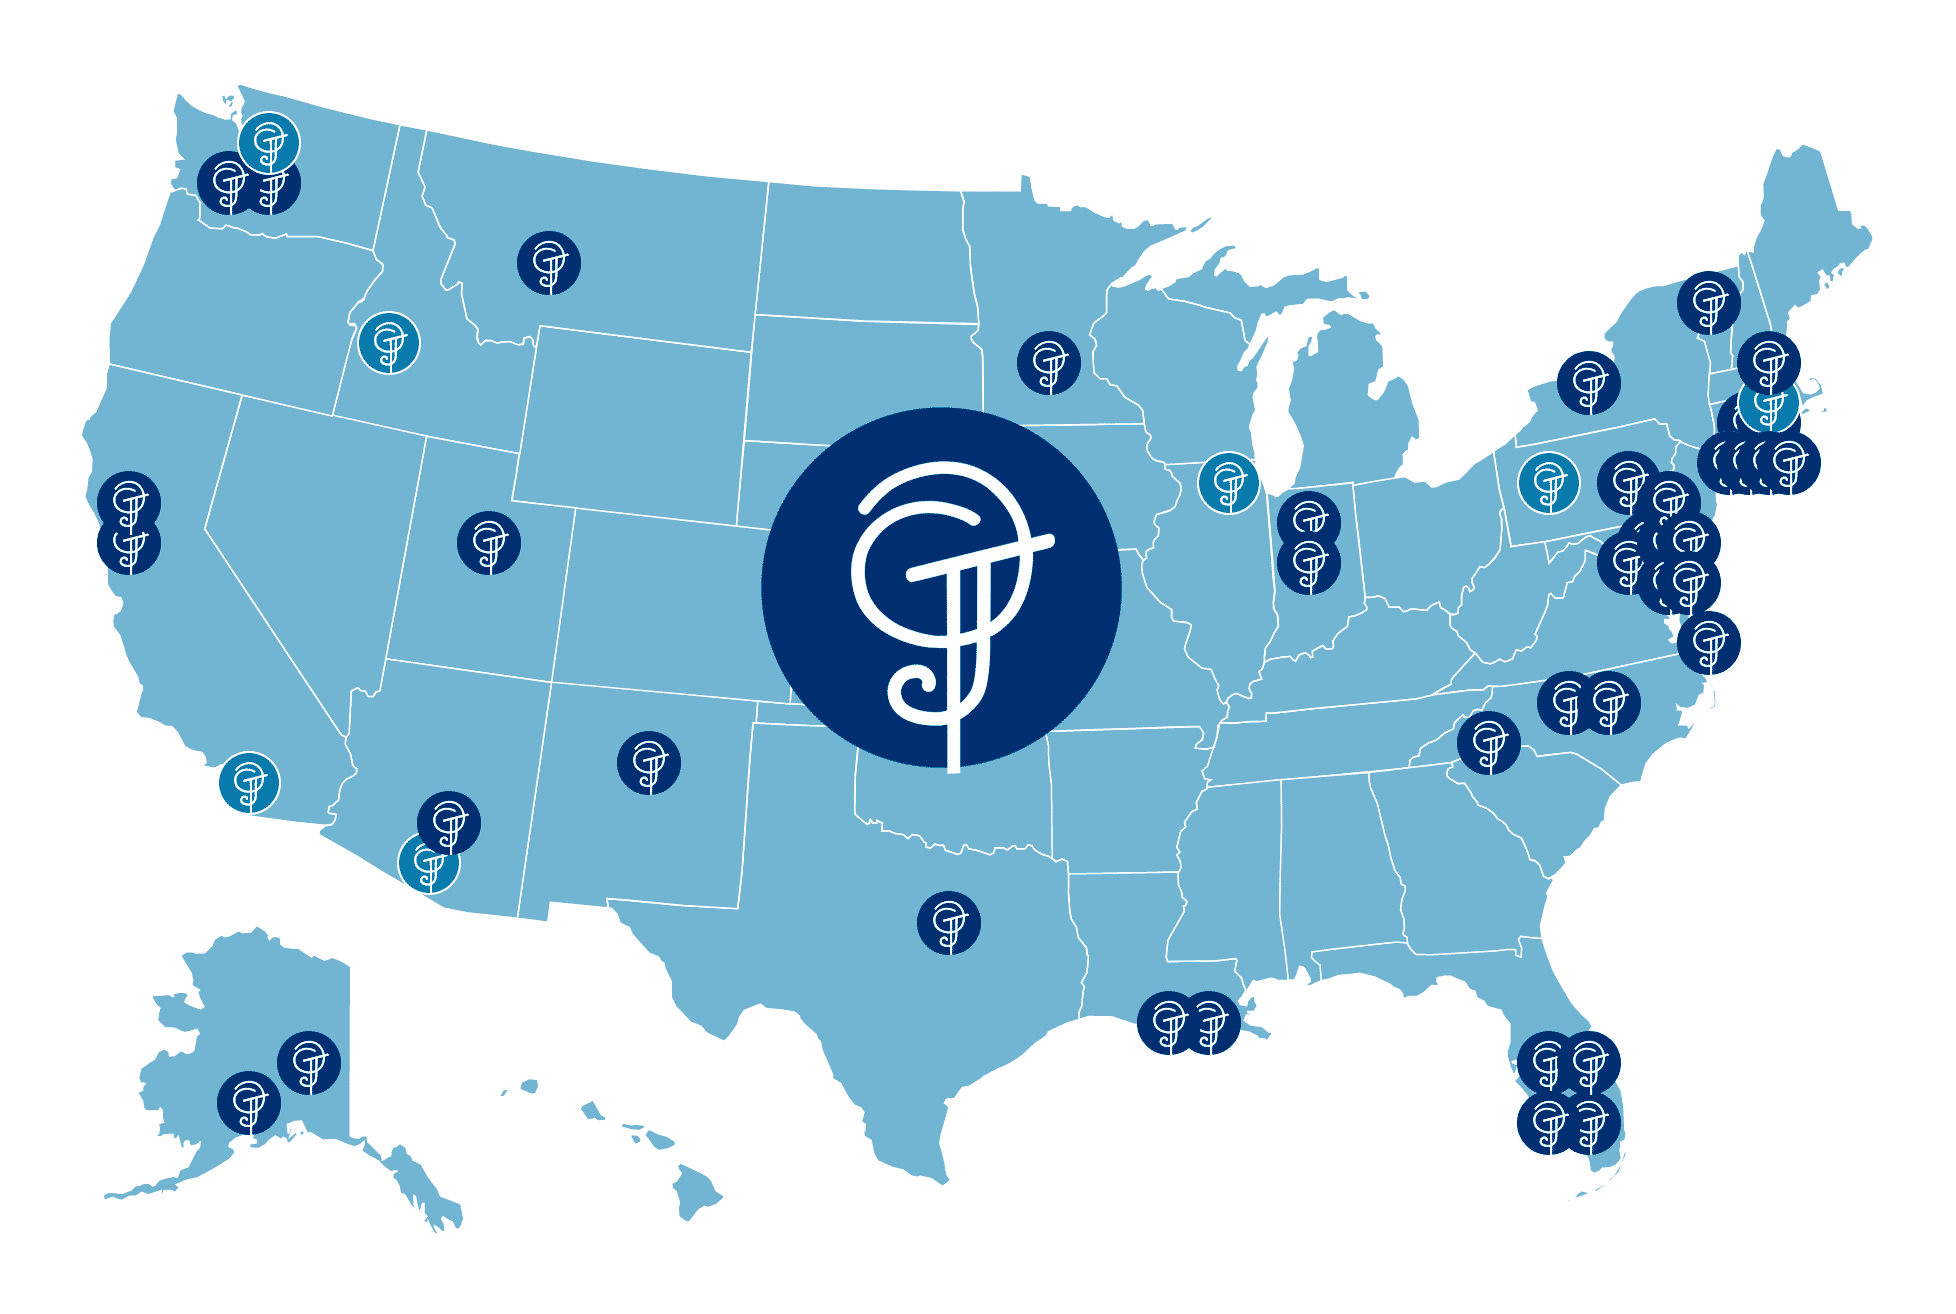 Map of culinary arts training programs across the United States